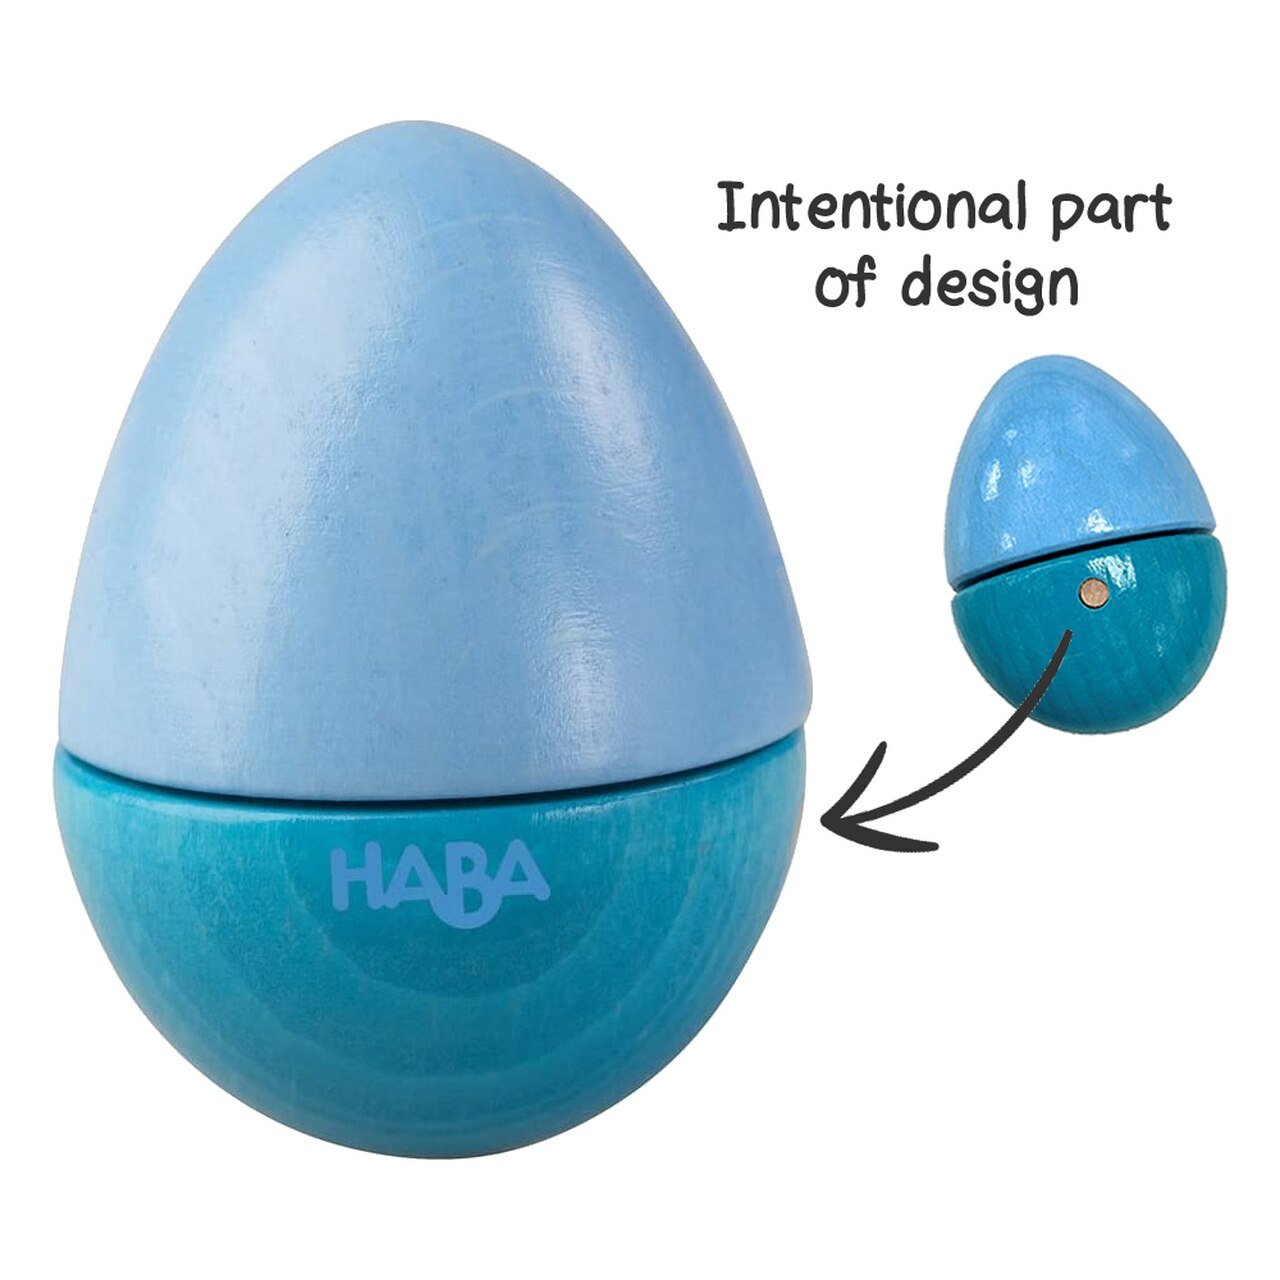 HABA Musical Eggs - Wood Wood Toys Canada's Favourite Montessori Toy Store